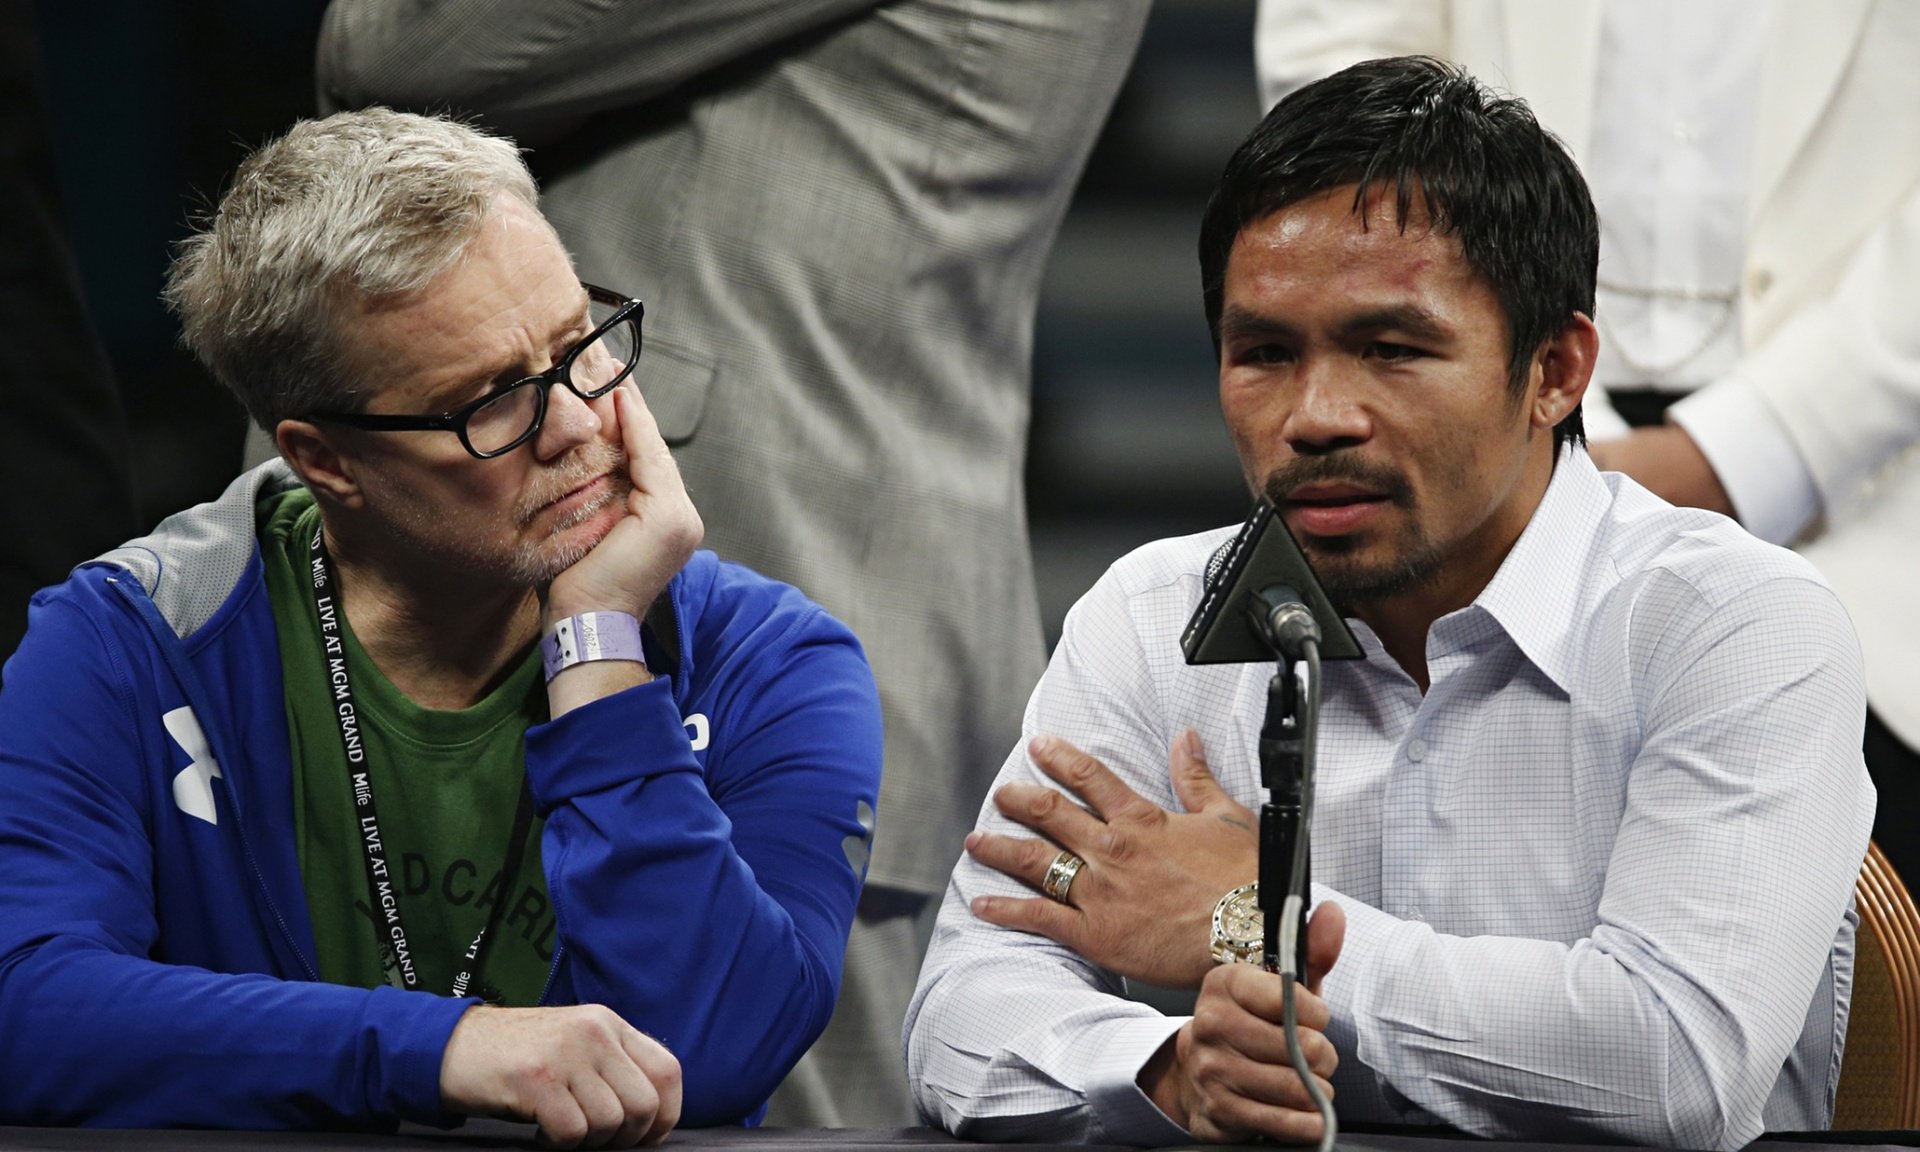 Manny Pacquiao undergoes surgery on injured right shoulder